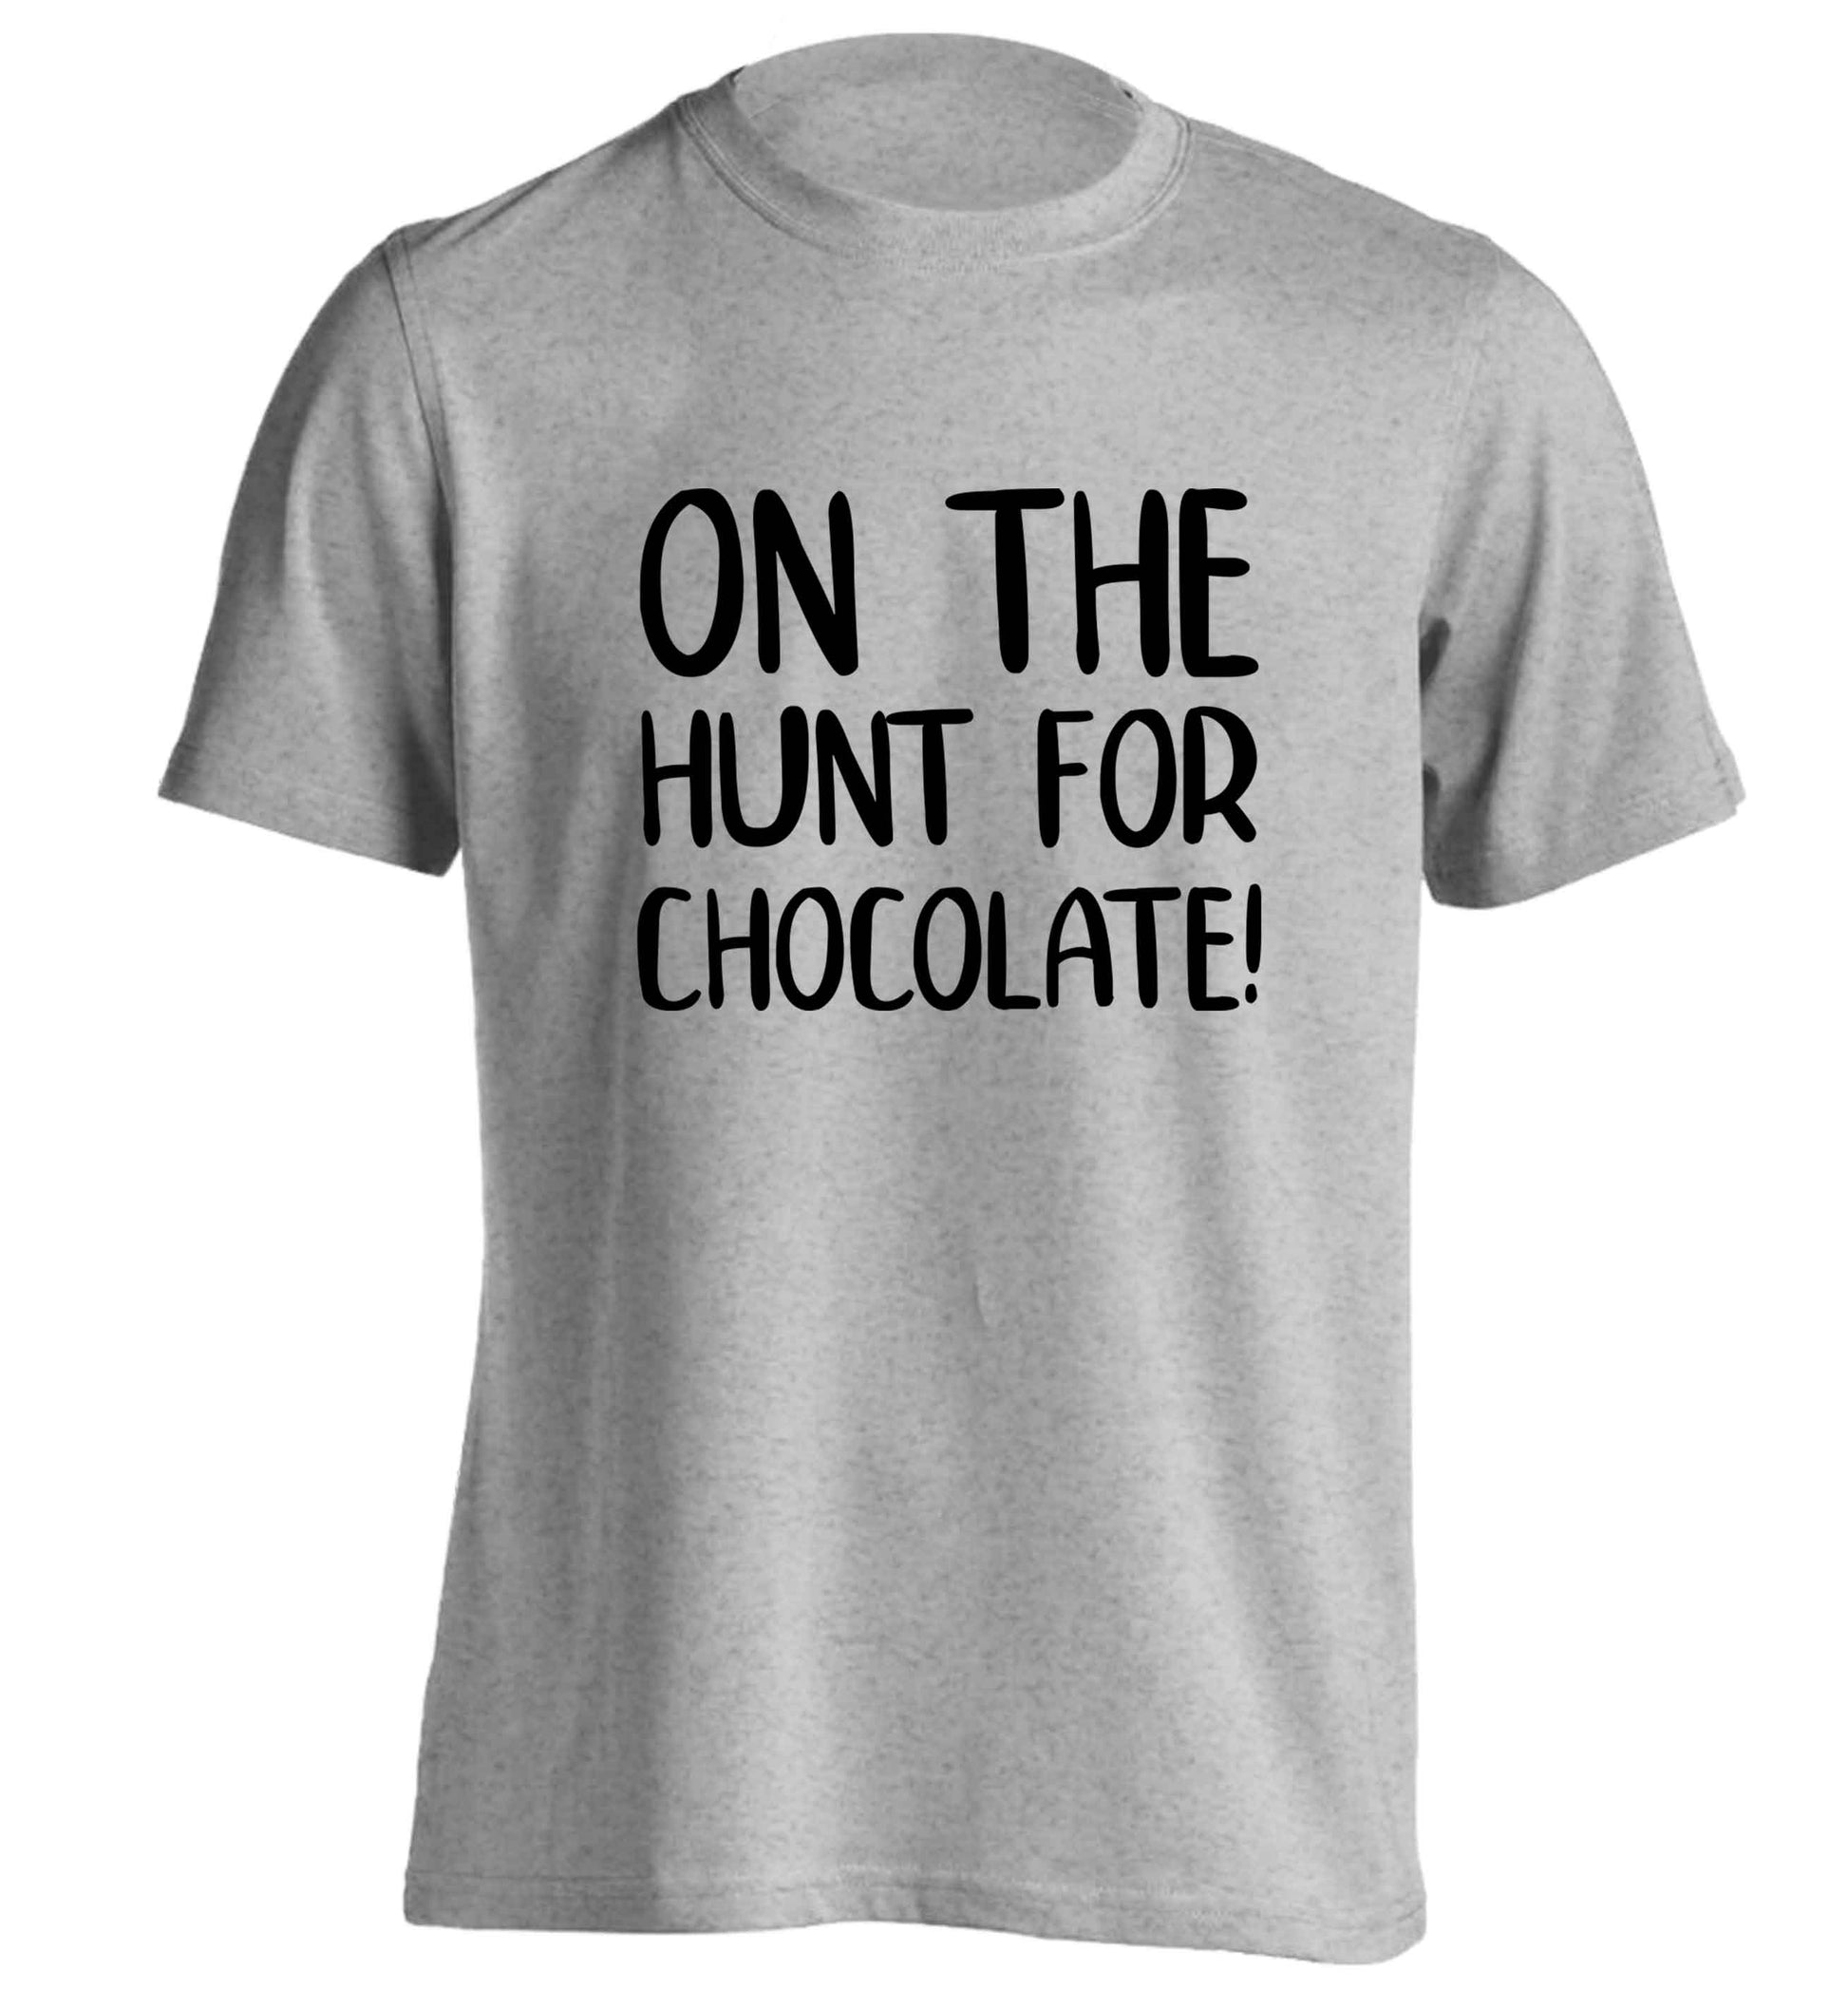 On the hunt for chocolate! adults unisex grey Tshirt 2XL